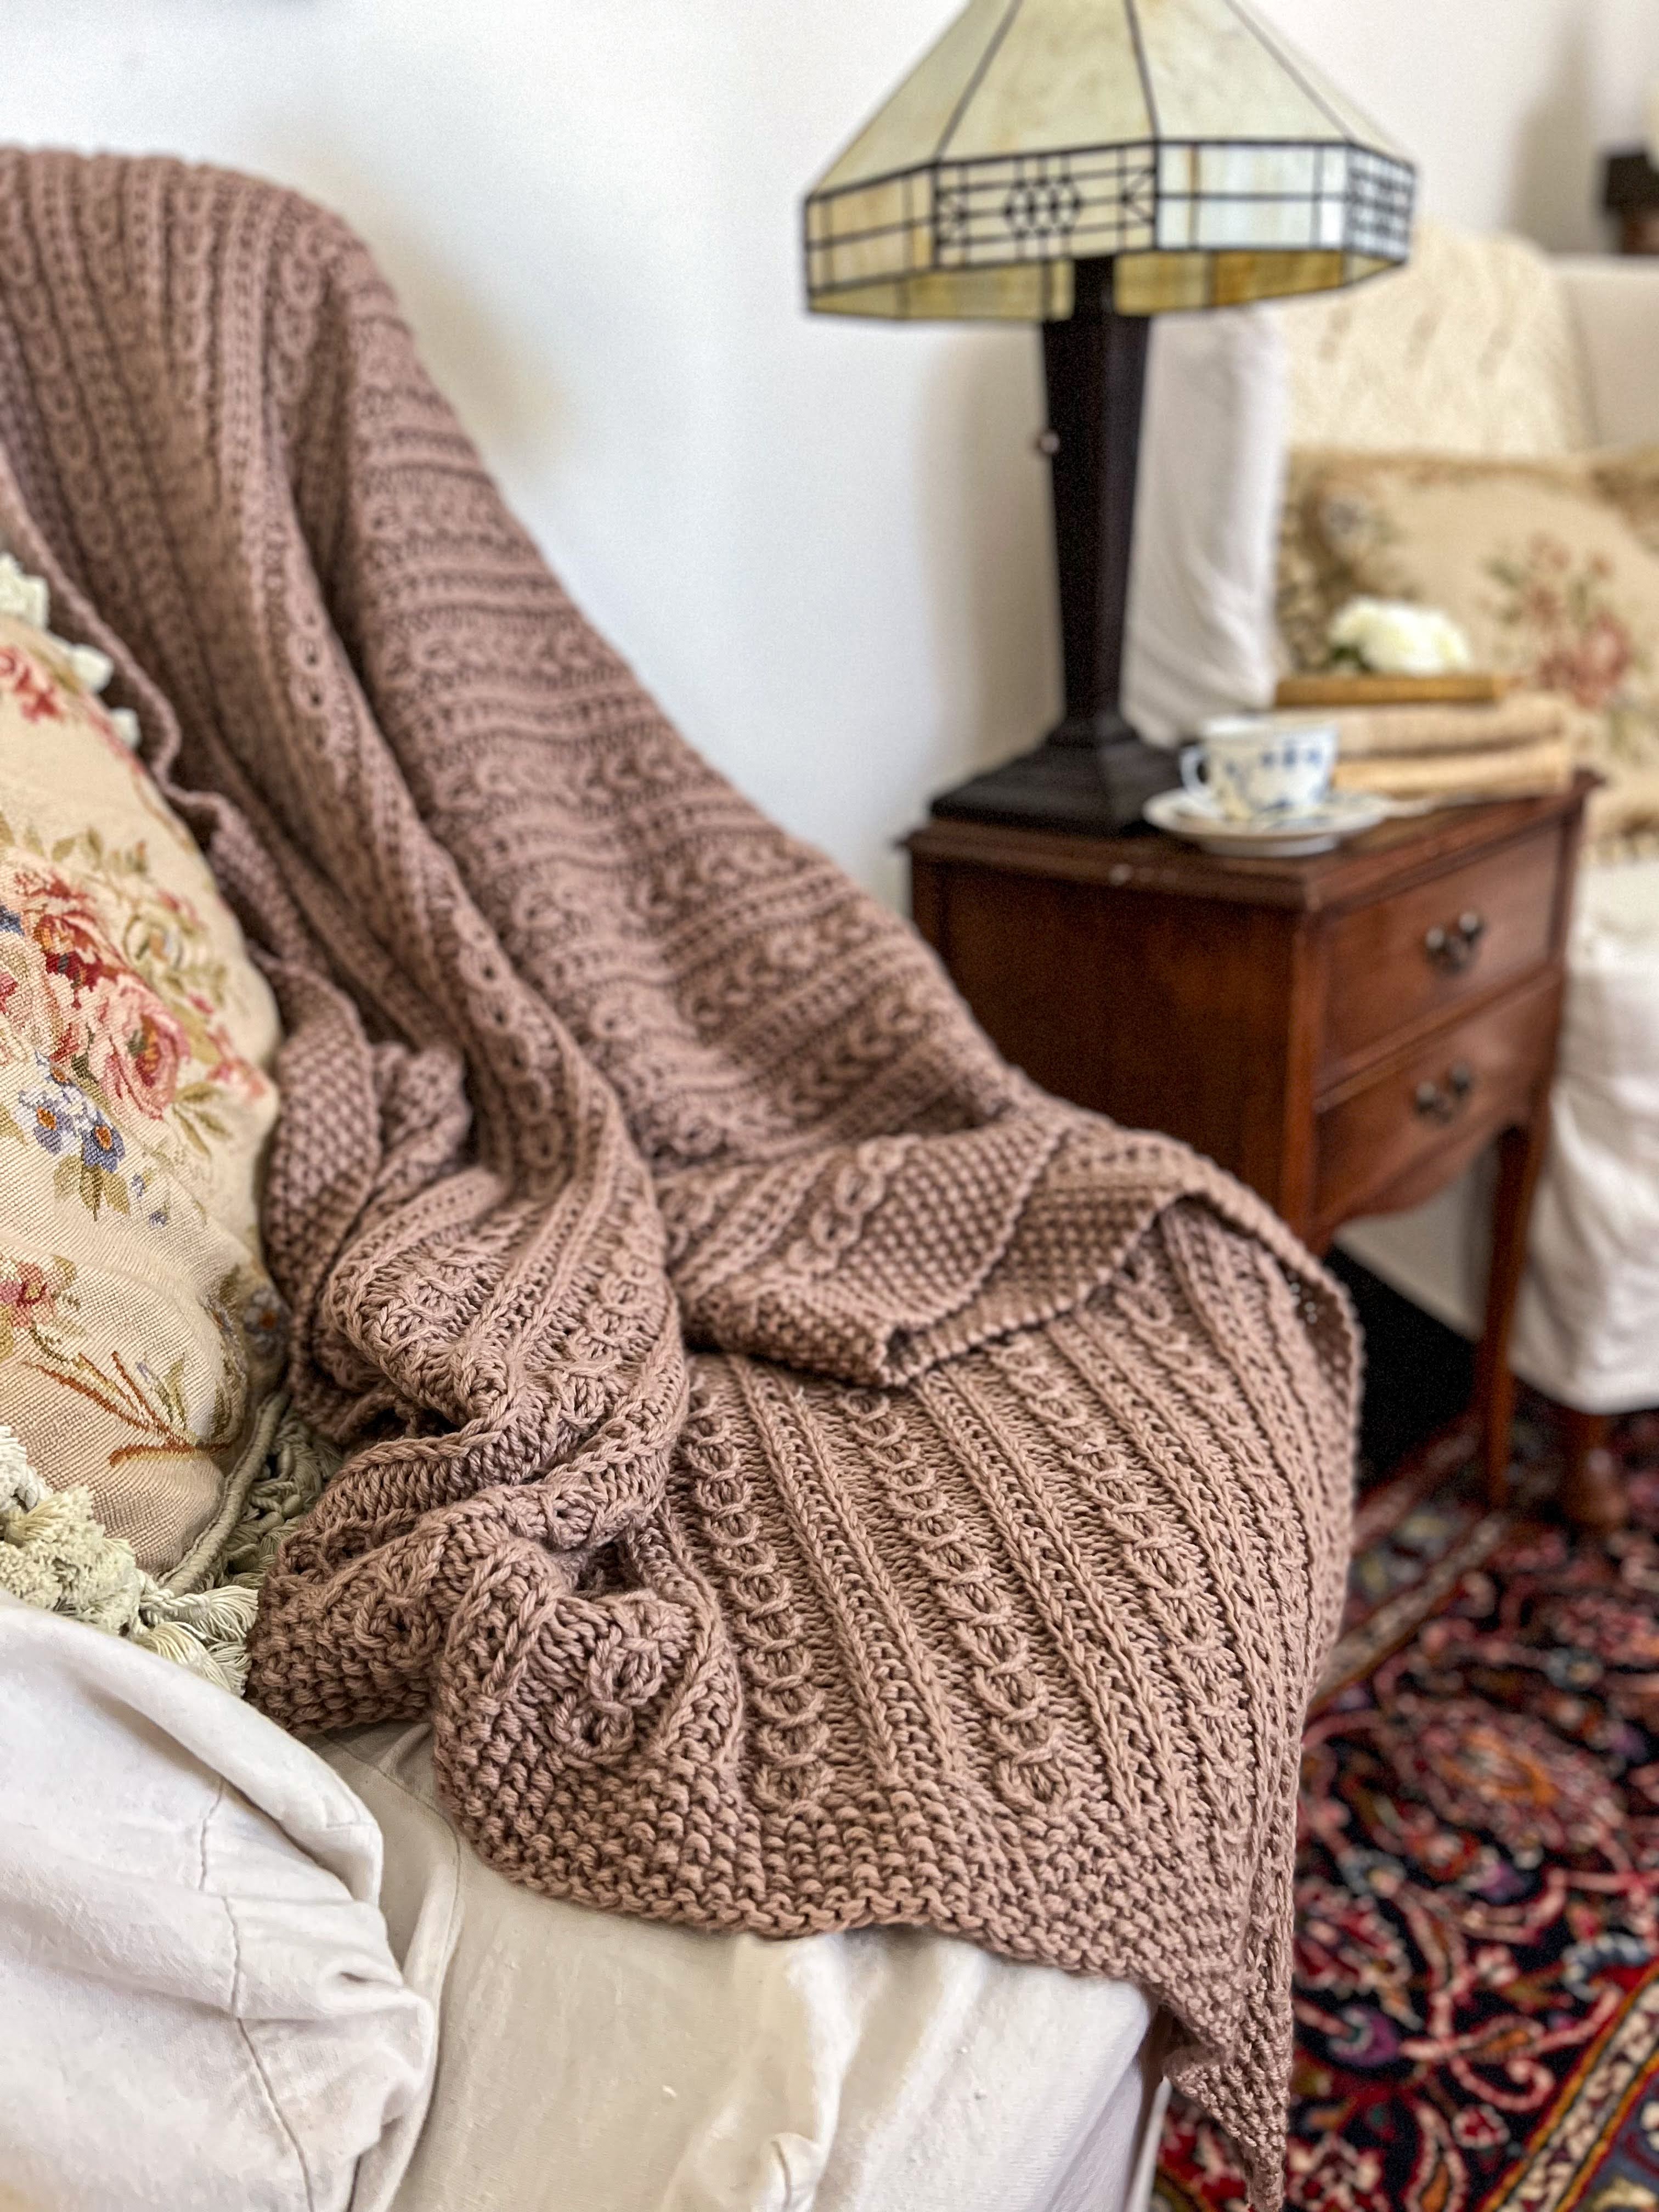 A close-up image of the Catalina Eddy Blanket draped across the arm and seat of a wing-back chair